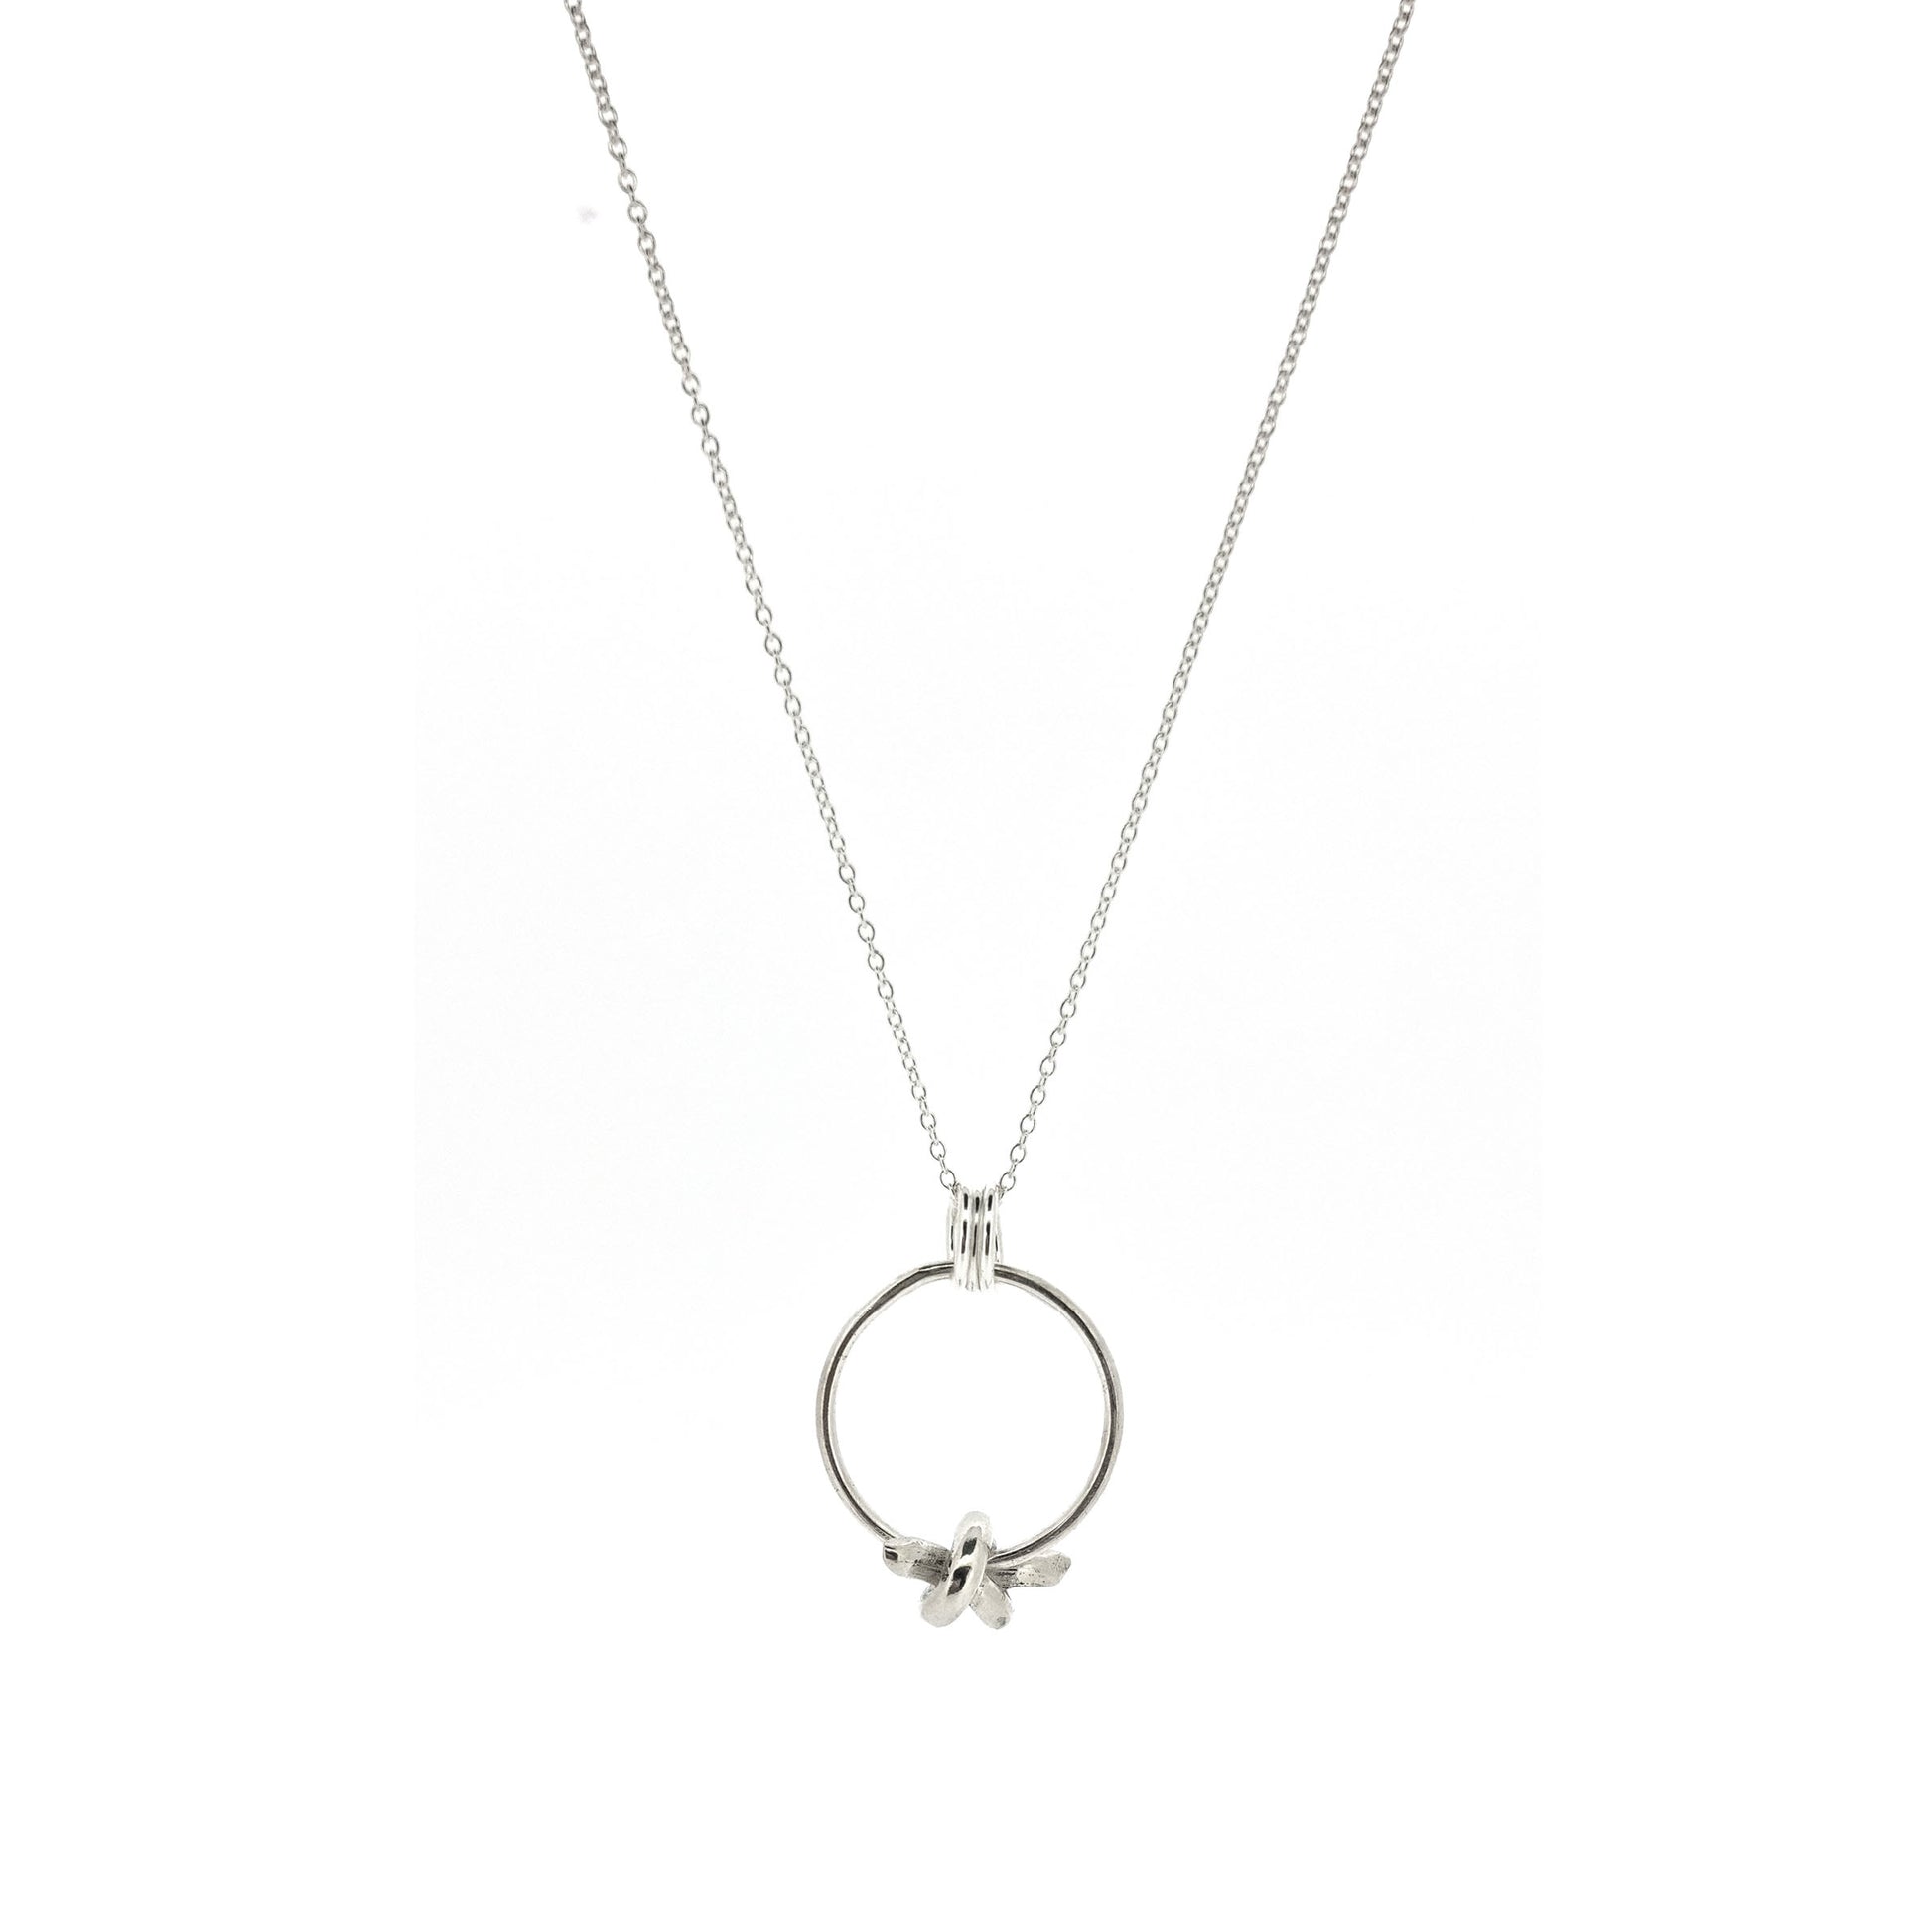 Silver circle pendant with spinning knot charm and triple circle bail. Suspended on a silver chain.